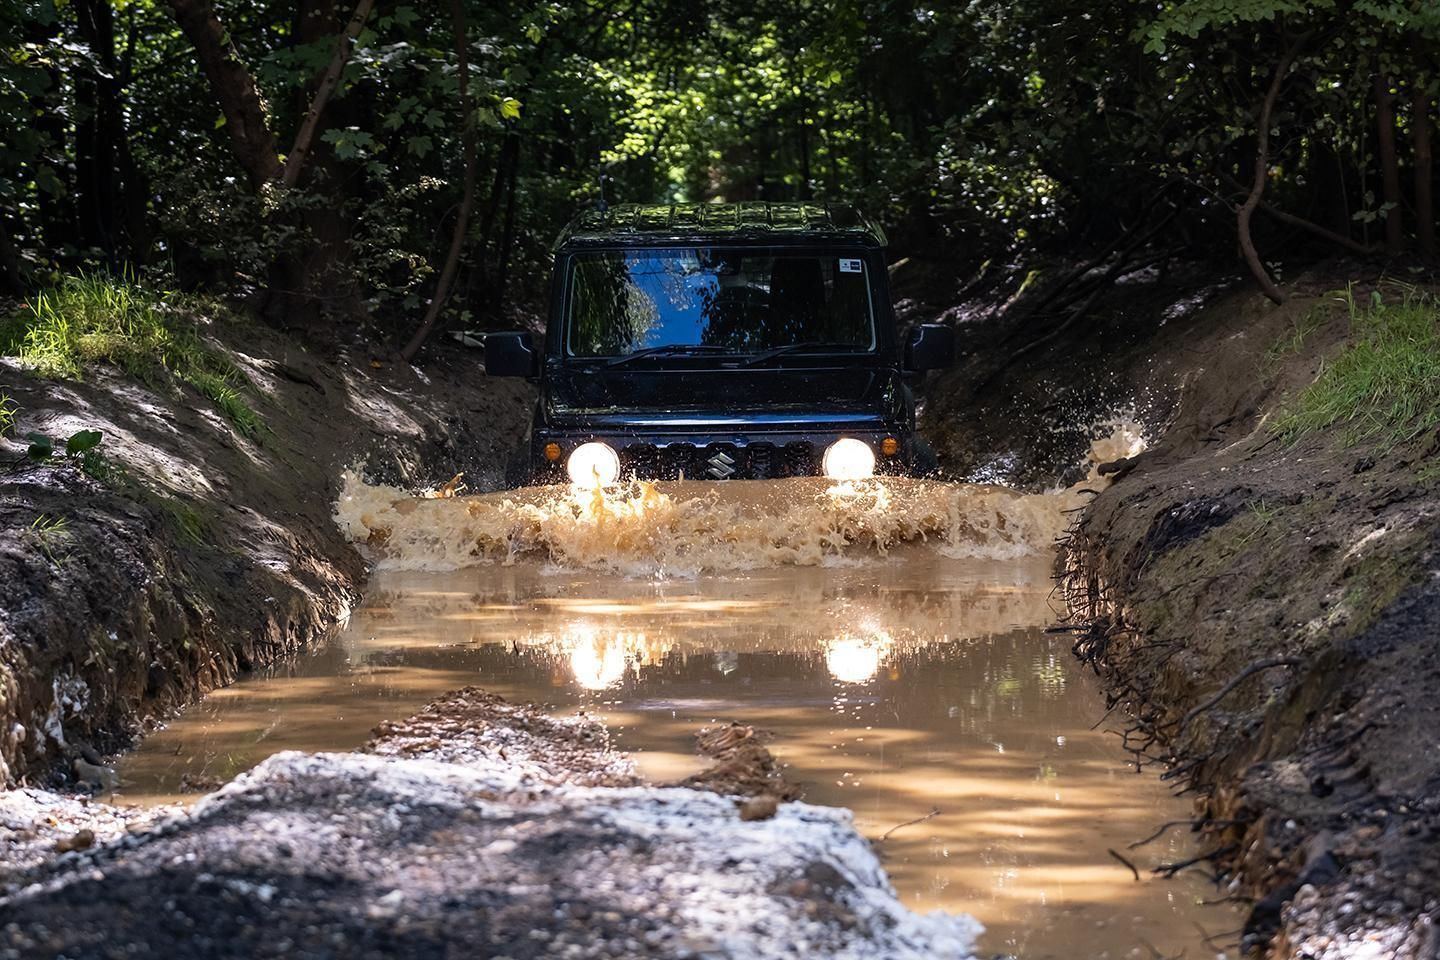 2021 Suzuki Jimny on- and off-road review